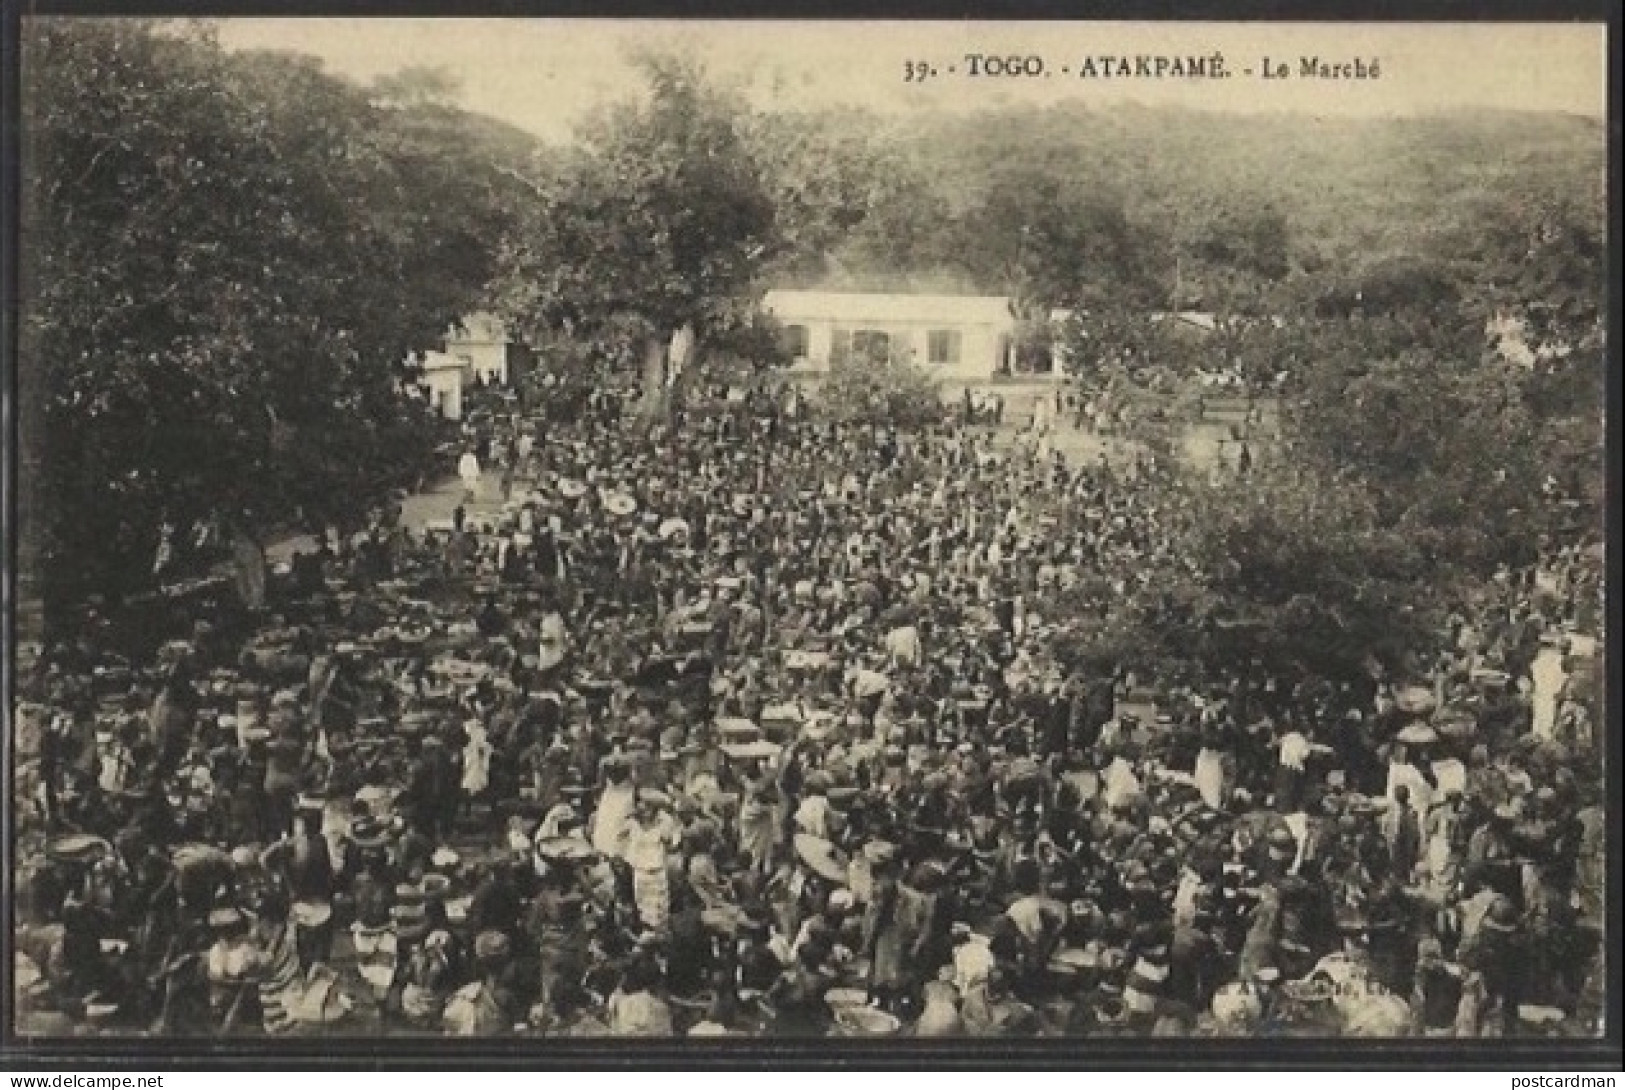 TOGO - Atakpame - Le Marché. Published By A. Accolatse - 39 - Togo